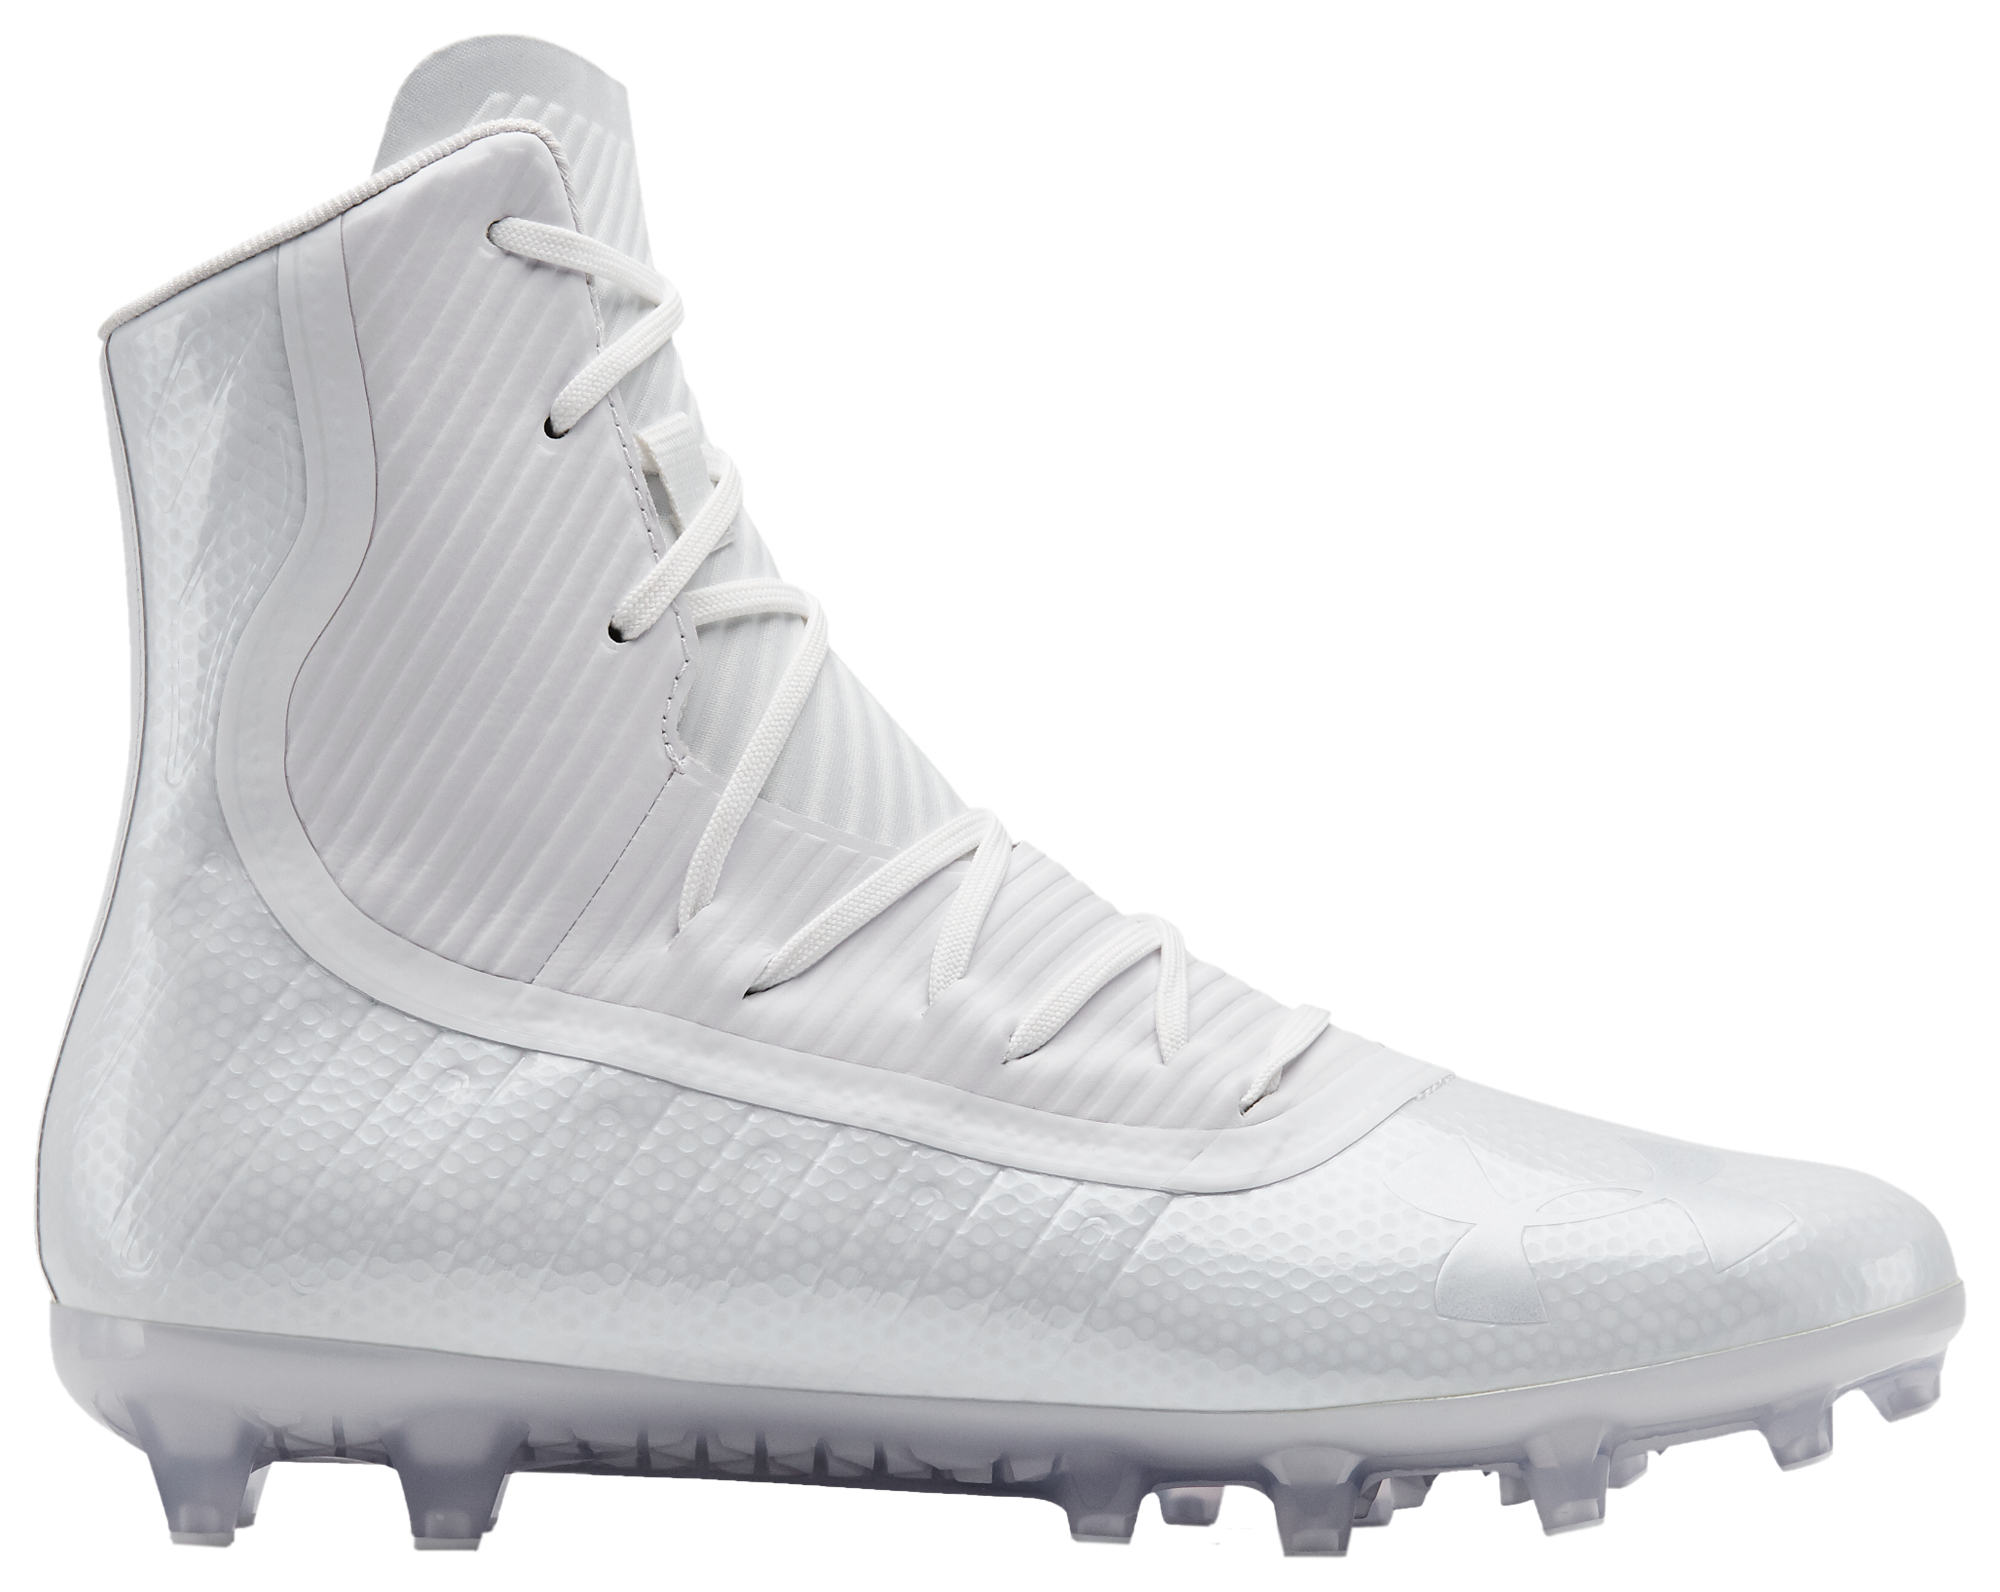 white under armor football cleats